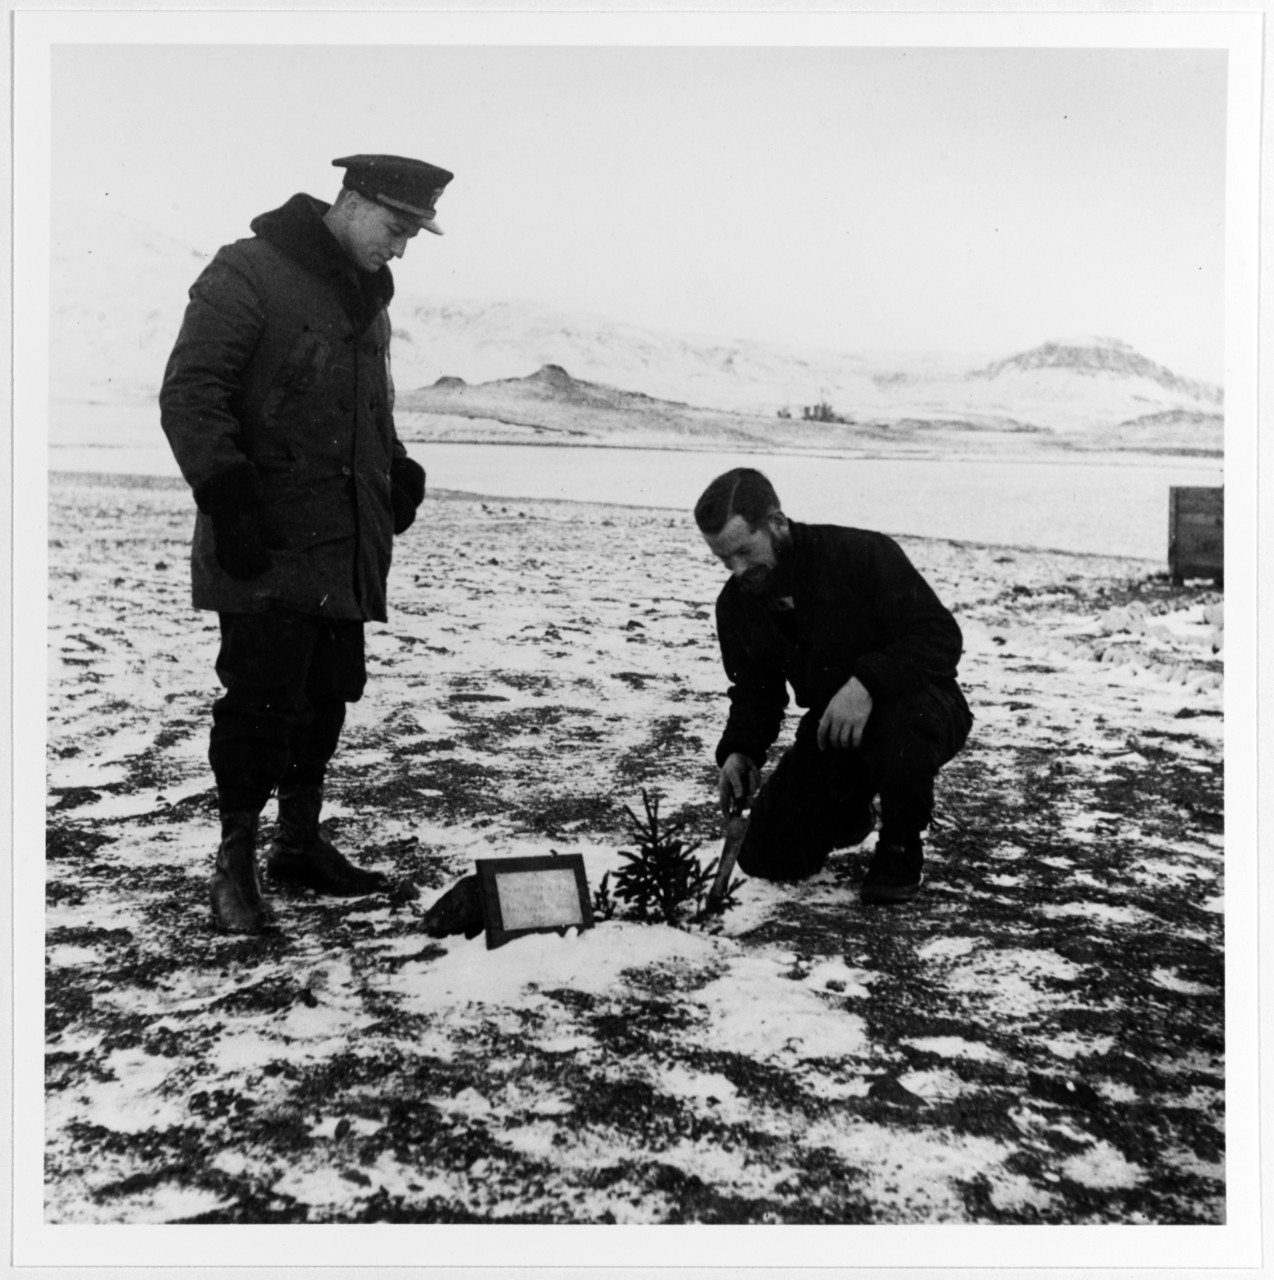 "Planting" a fir tree at Falcon's Landing, Iceland